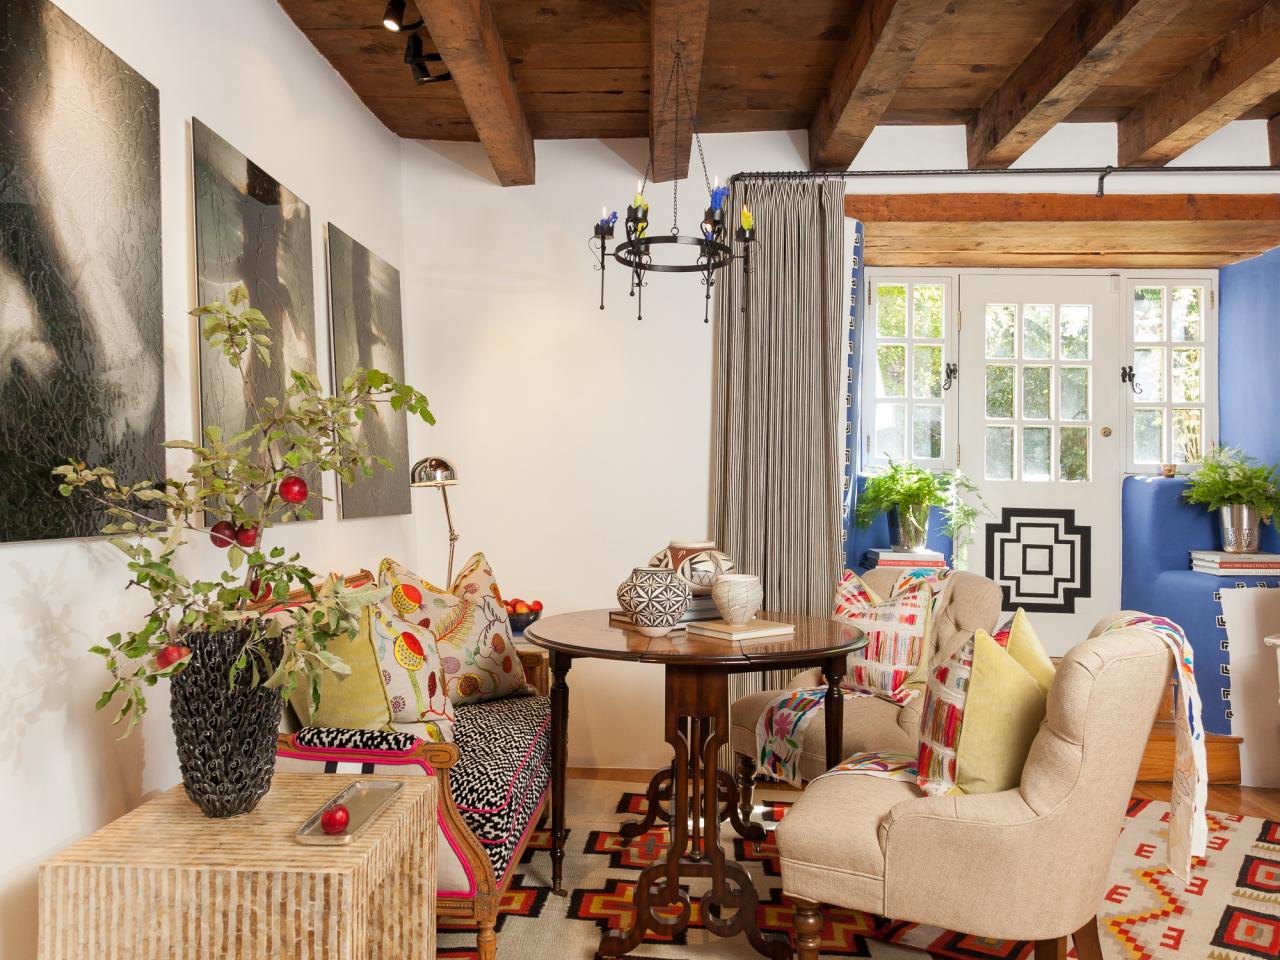 An adobe house in Marrakech decorated in a modern Berber style